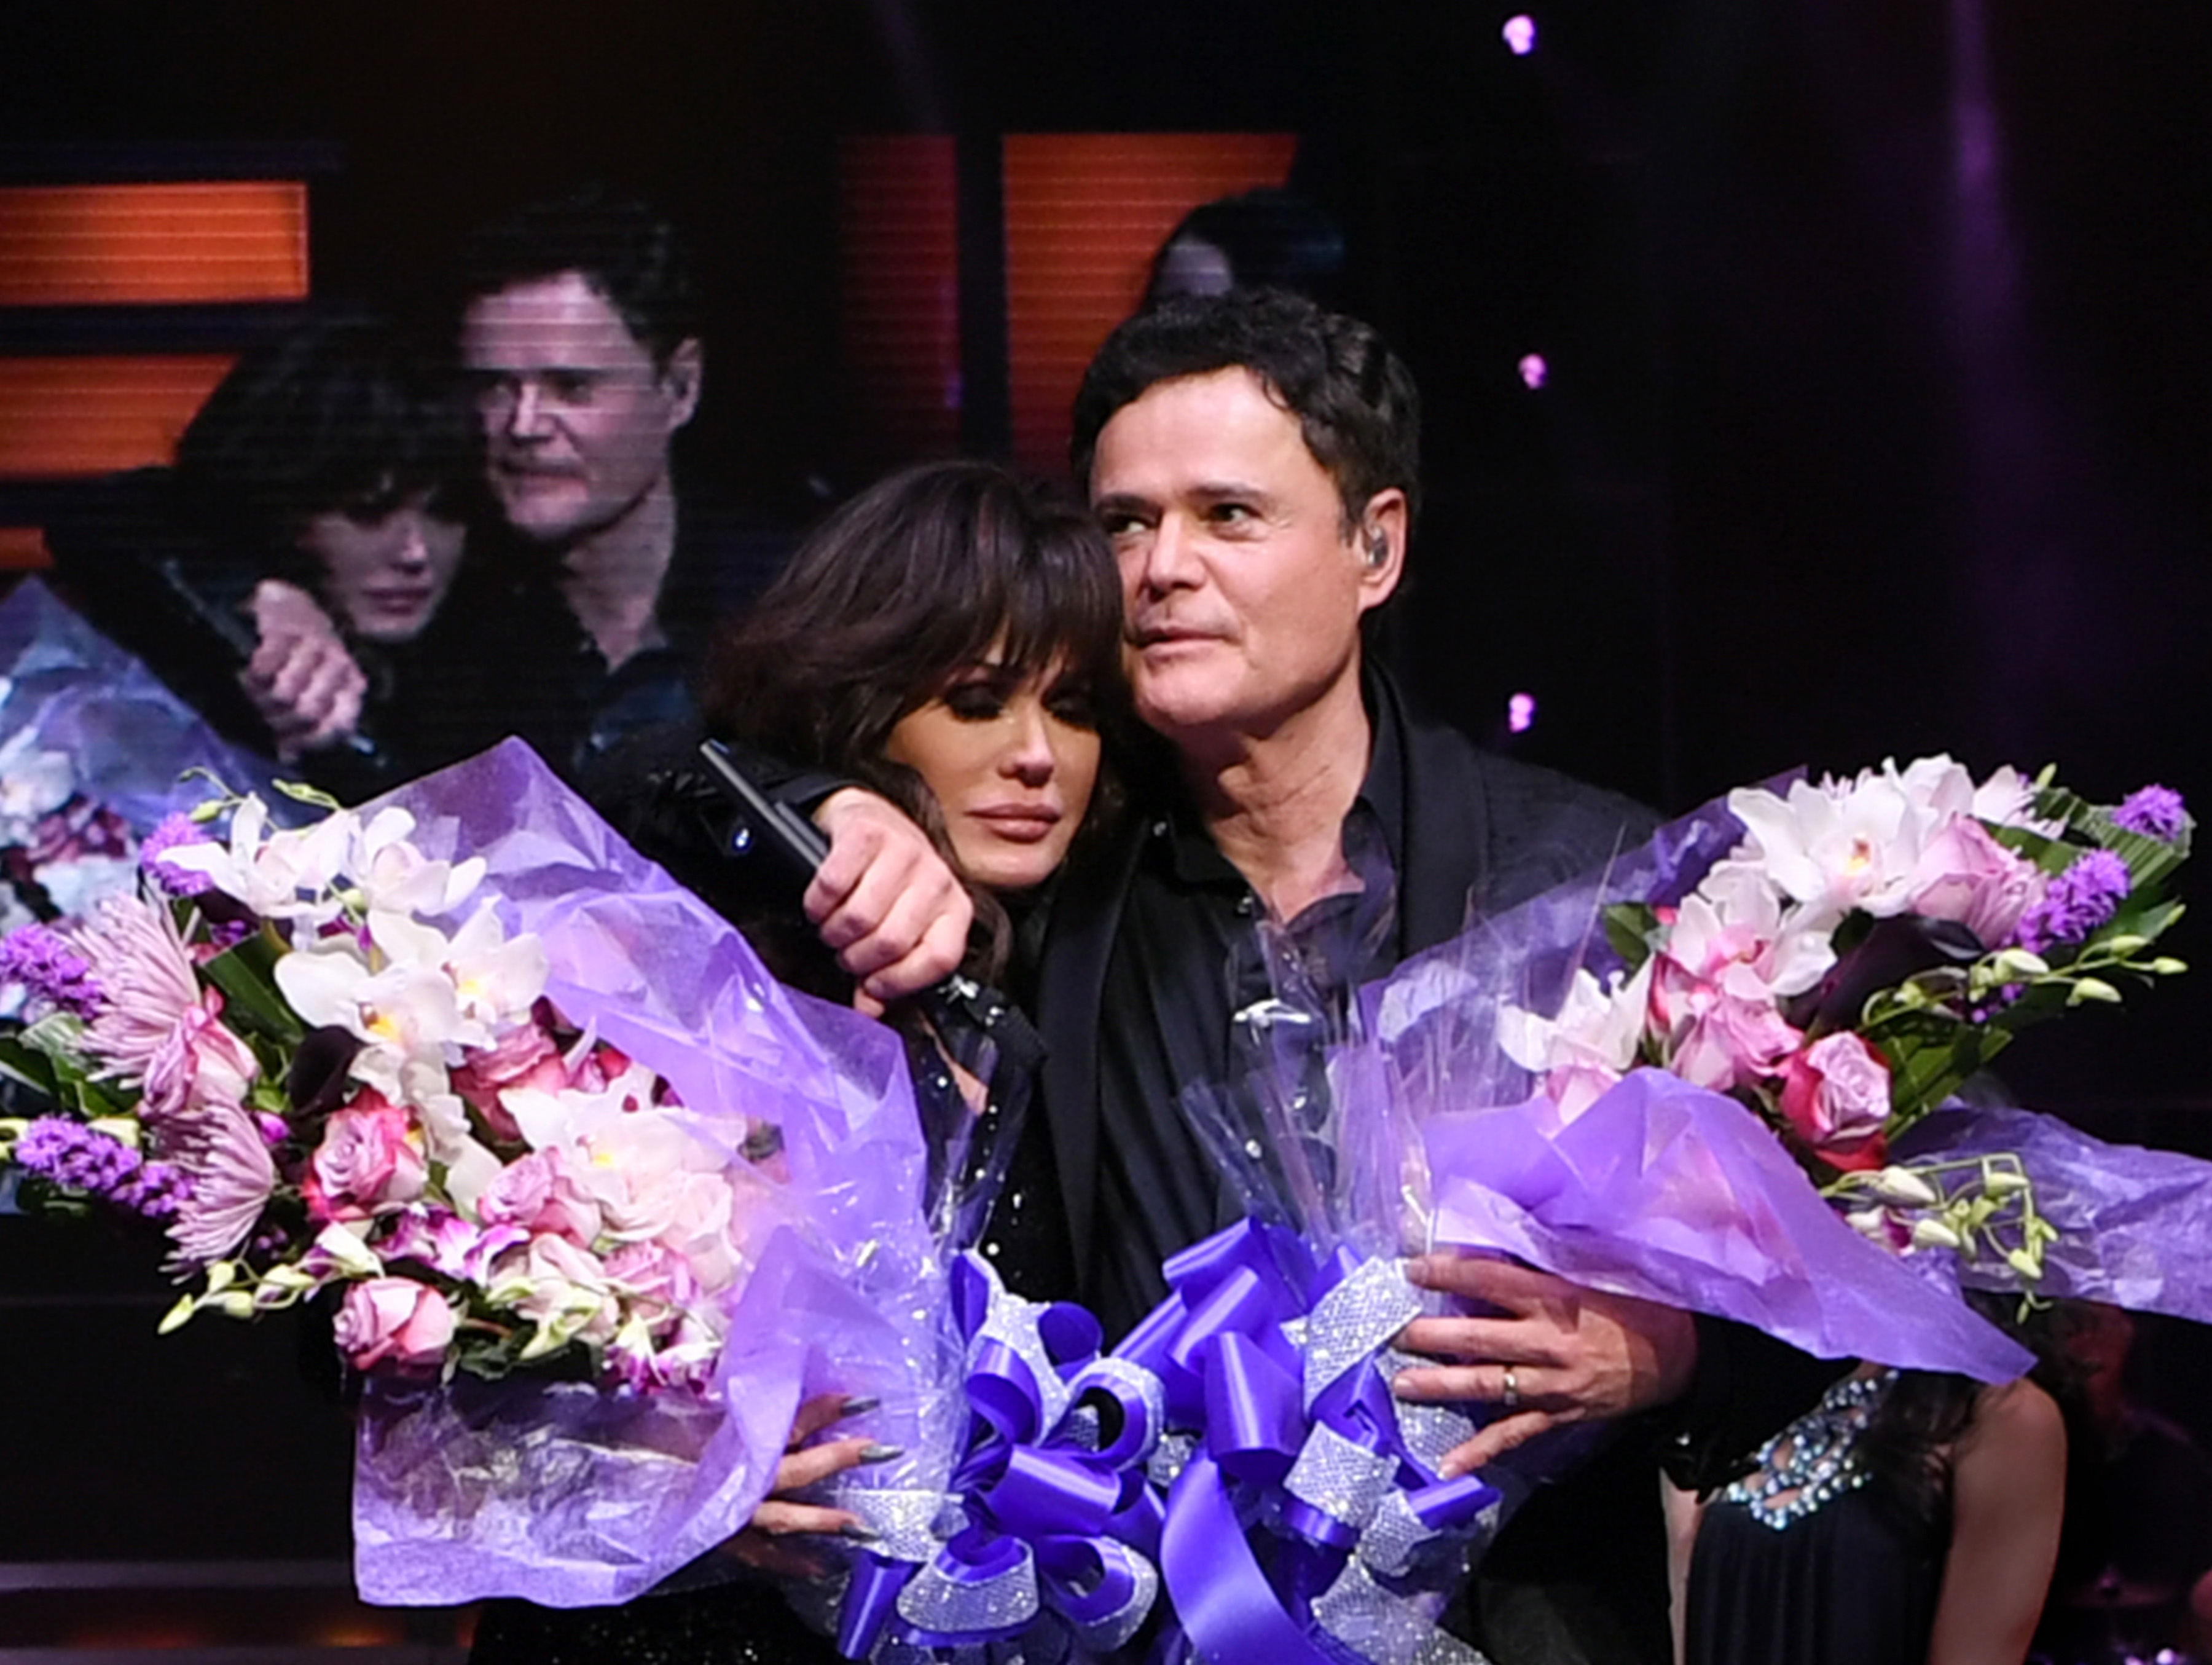 Marie Osmond and Donny Osmond in Las Vegas, Nevada, on November 16, 2019 | Source: Getty Images